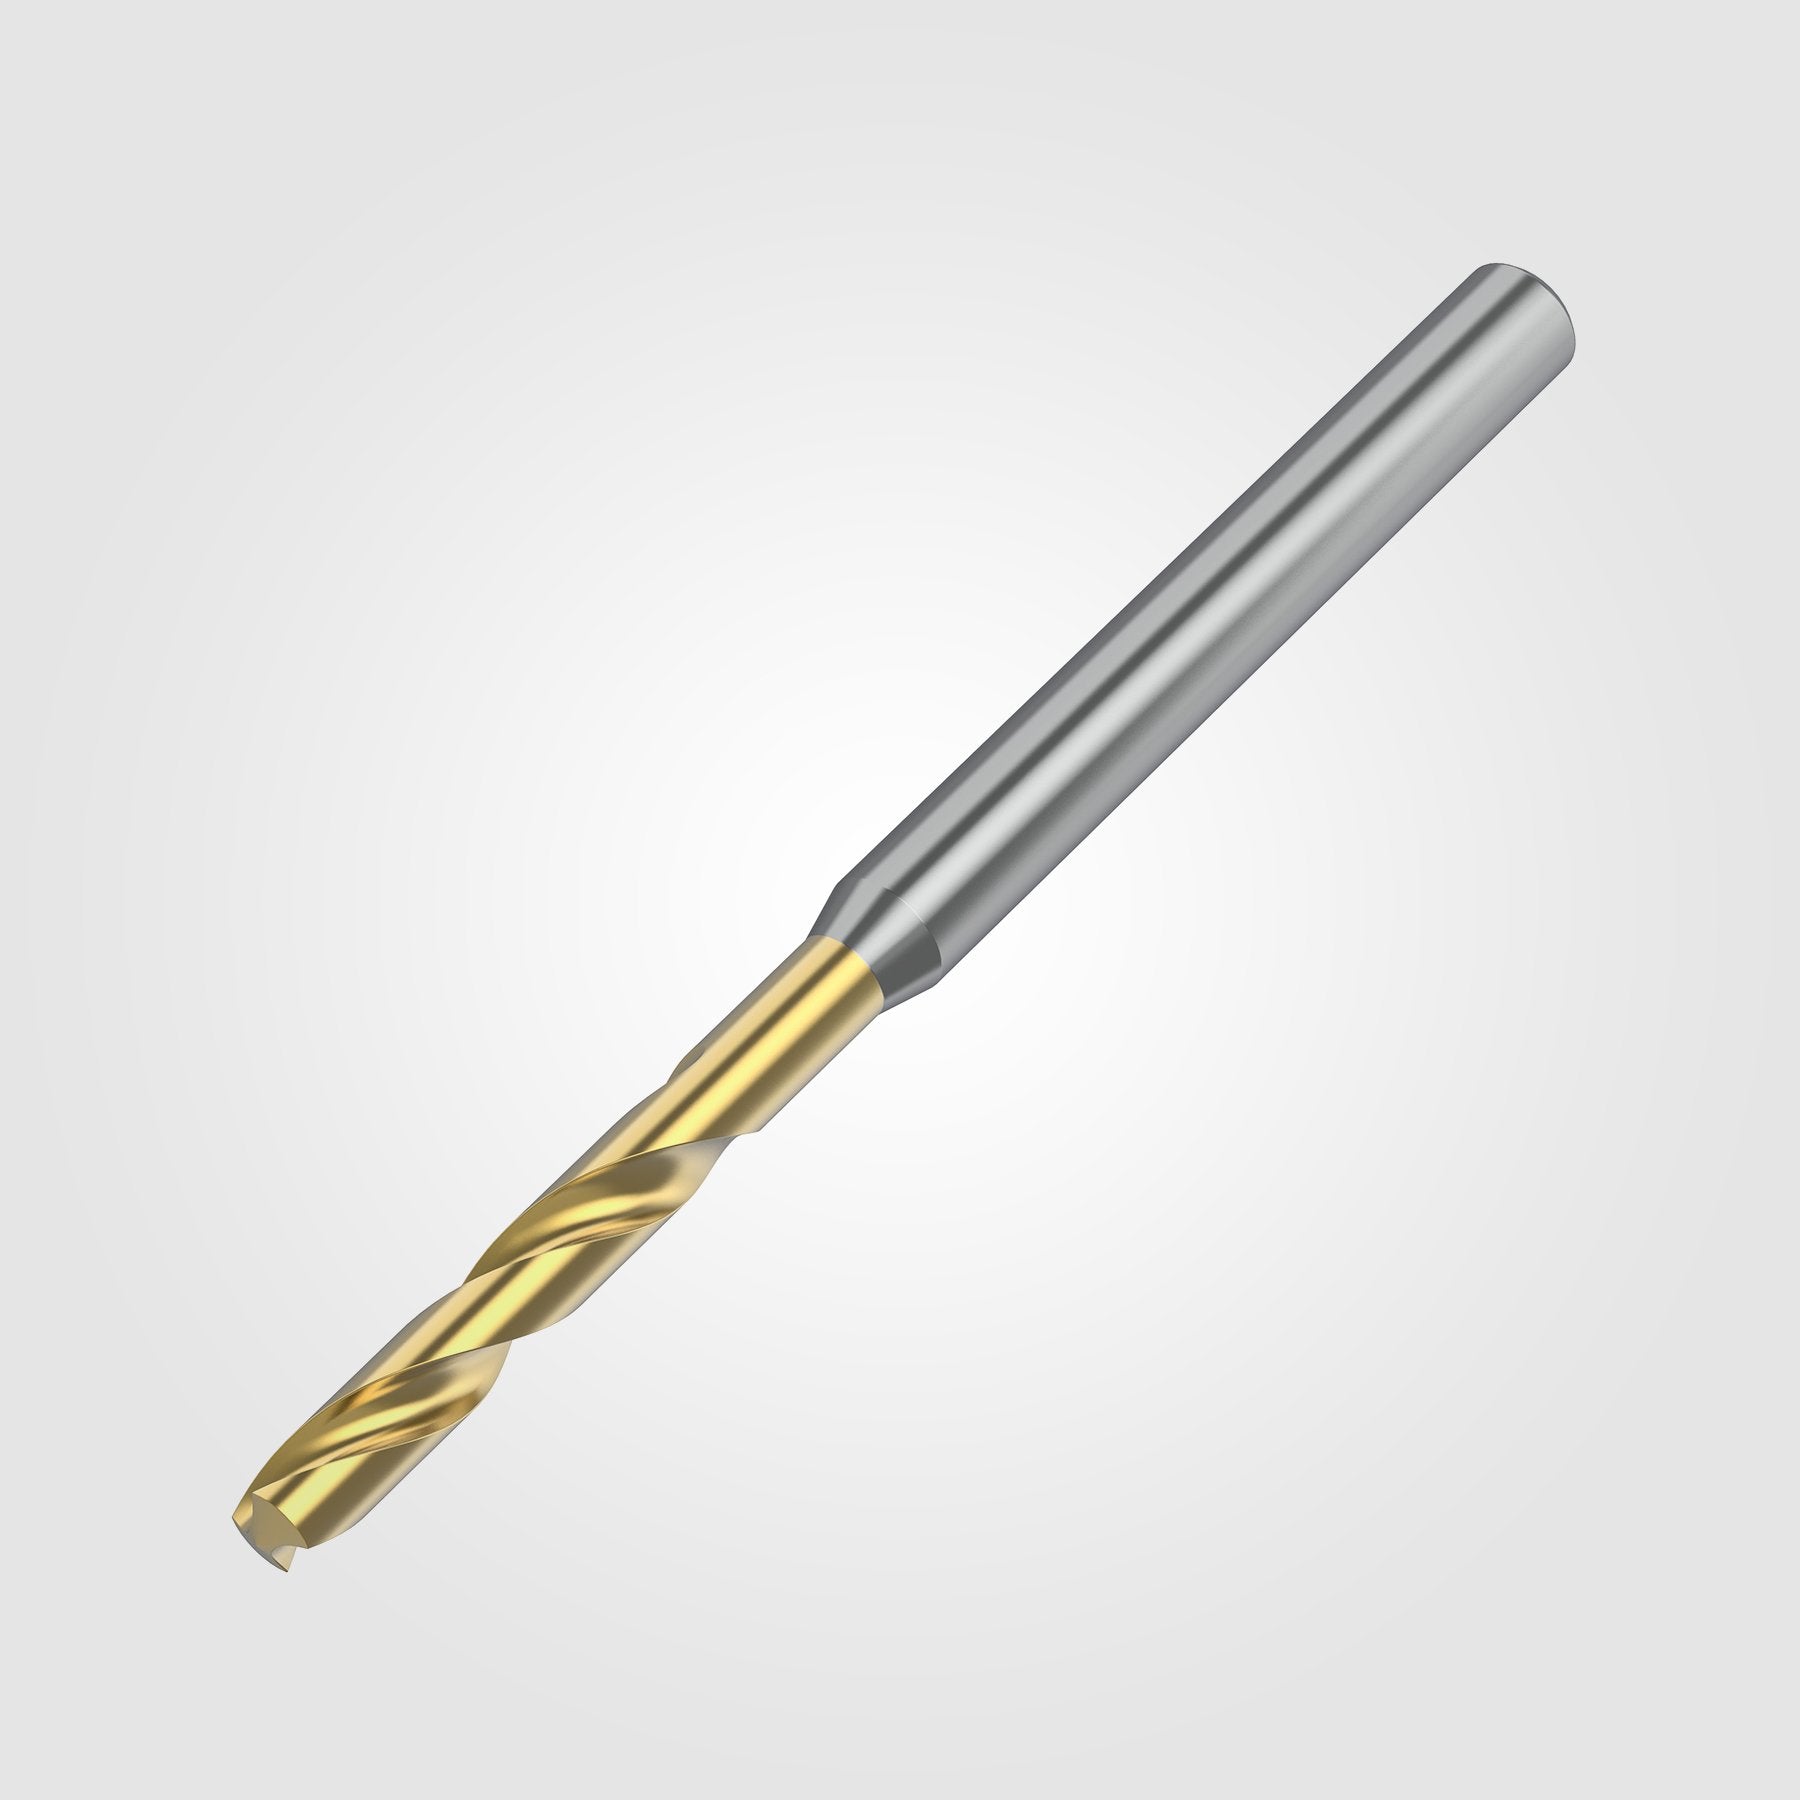 GOdrill (THROUGH COOLANT) | 9.8mm / .3858" / 3xD | SOLID CARBIDE DRILL | 4151199